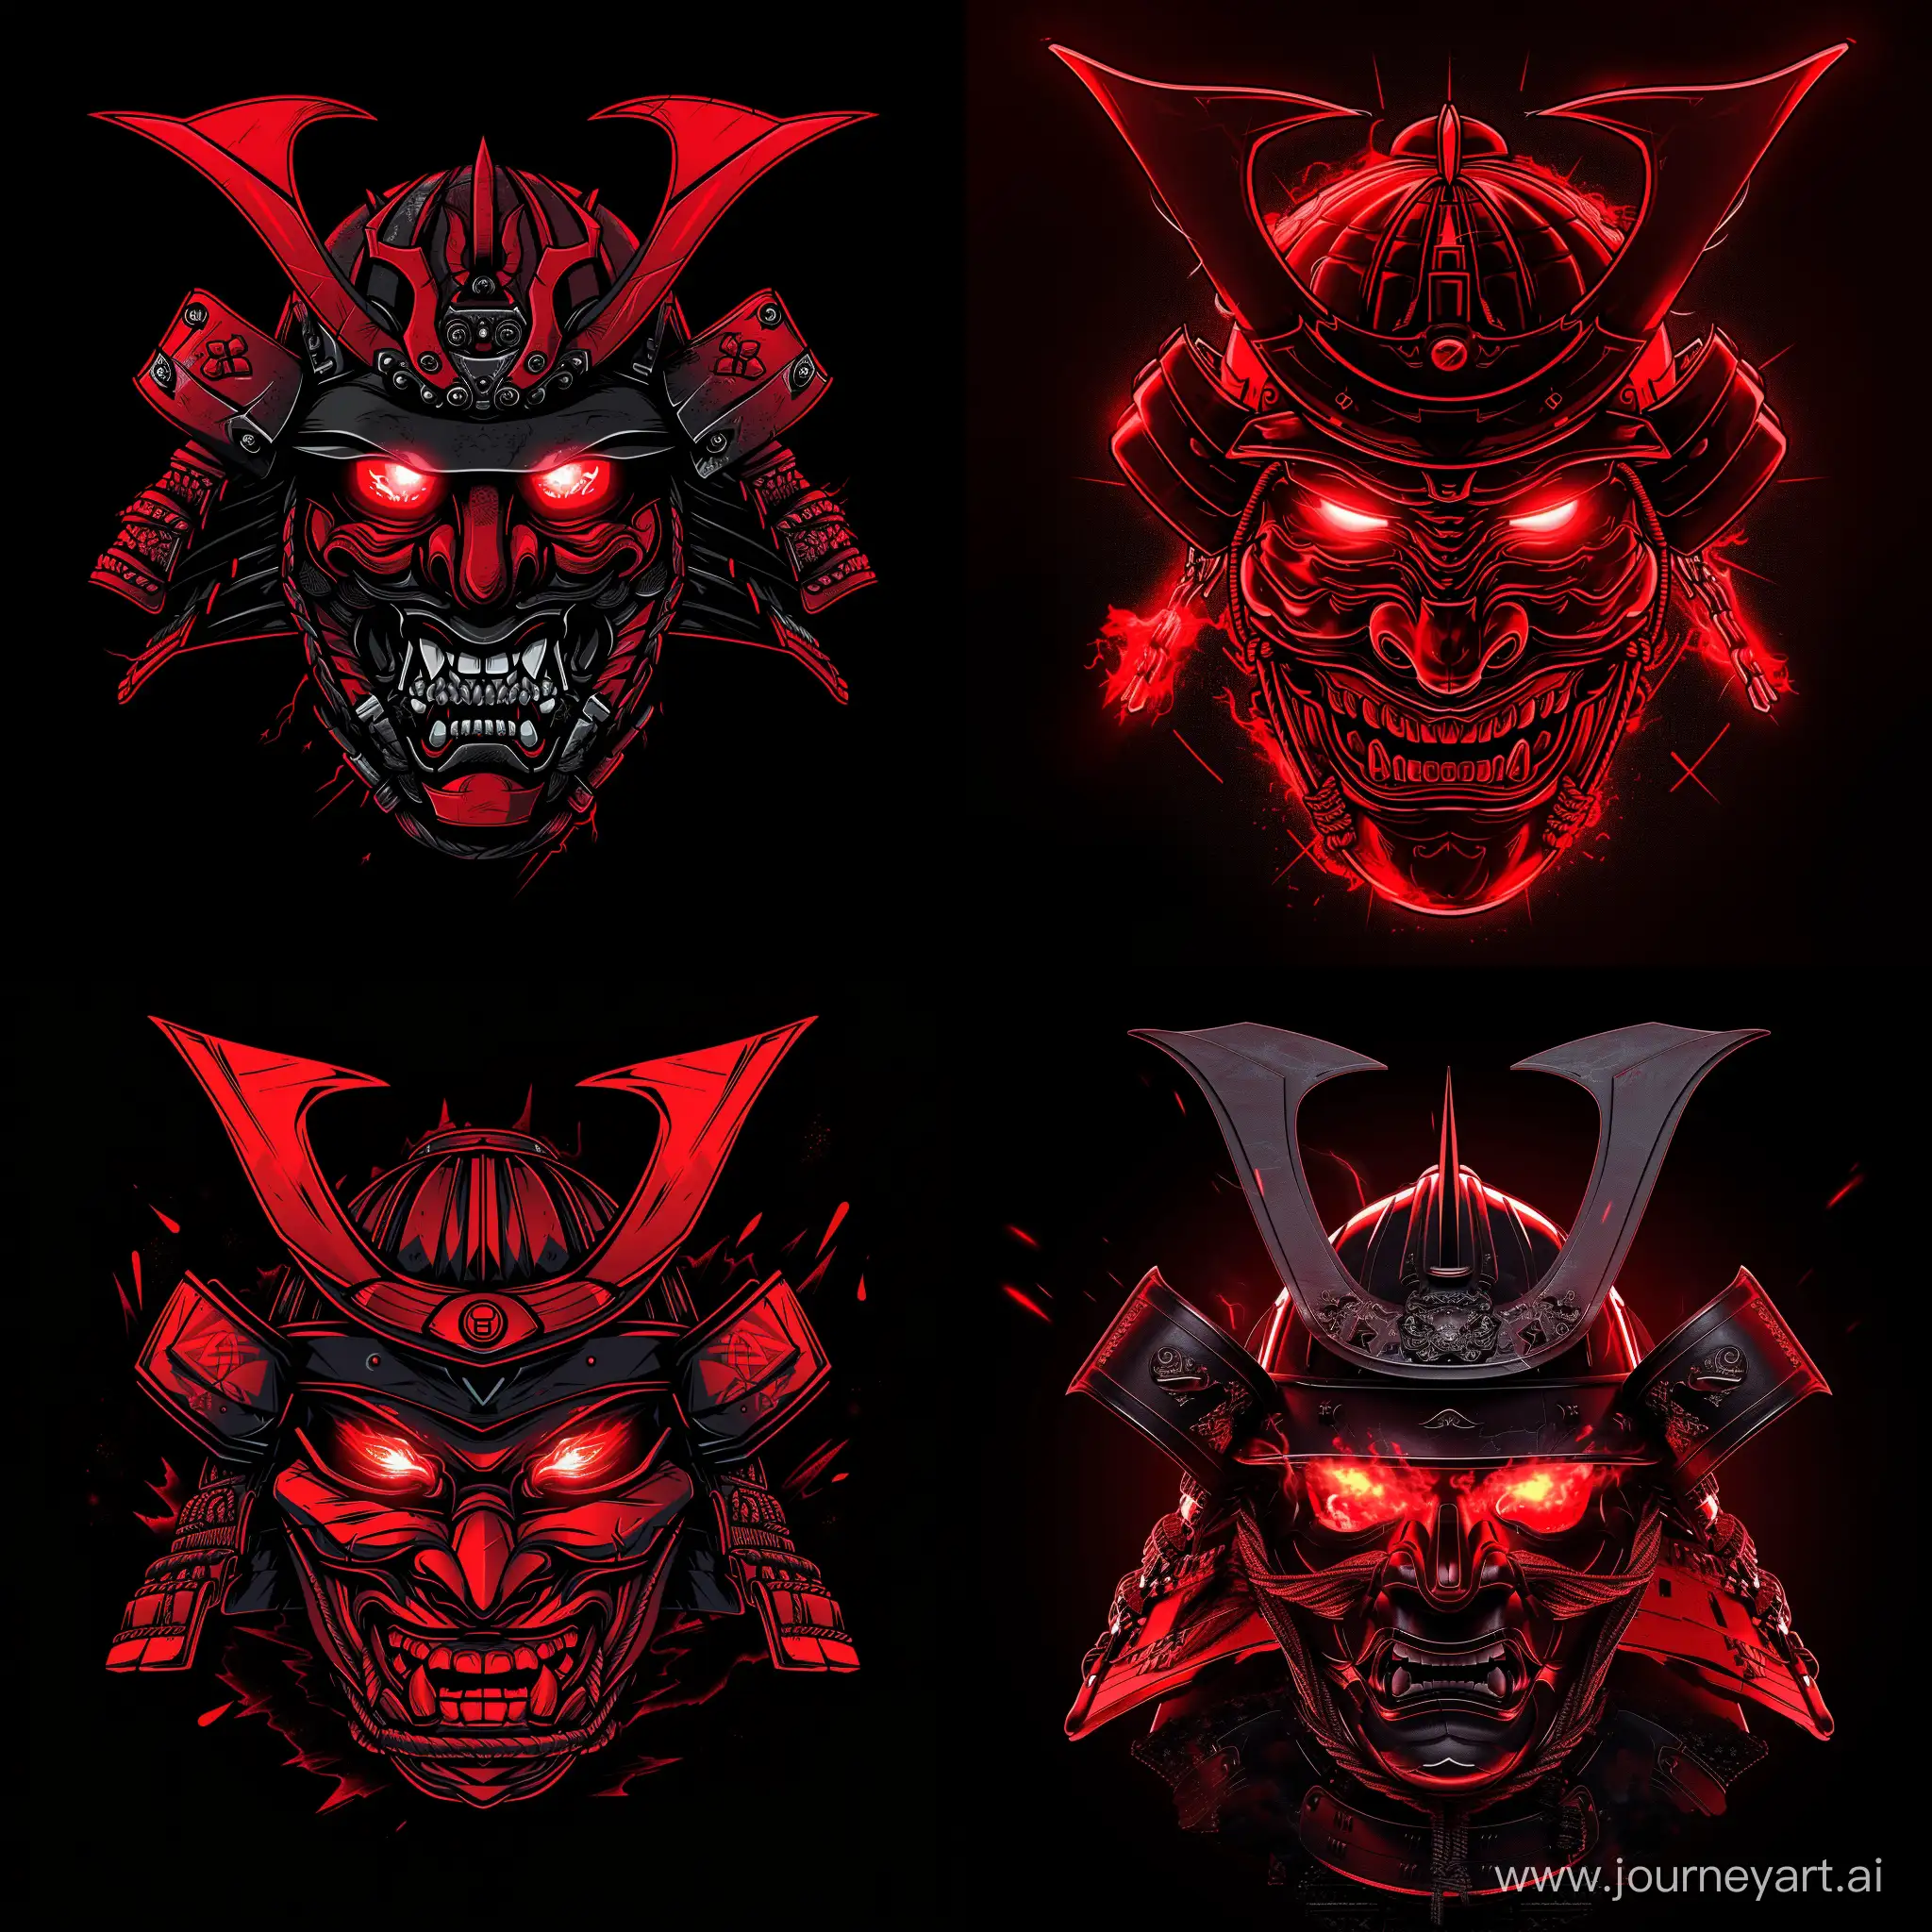 red cyber samurai head with red burning eyes, in hannya mask